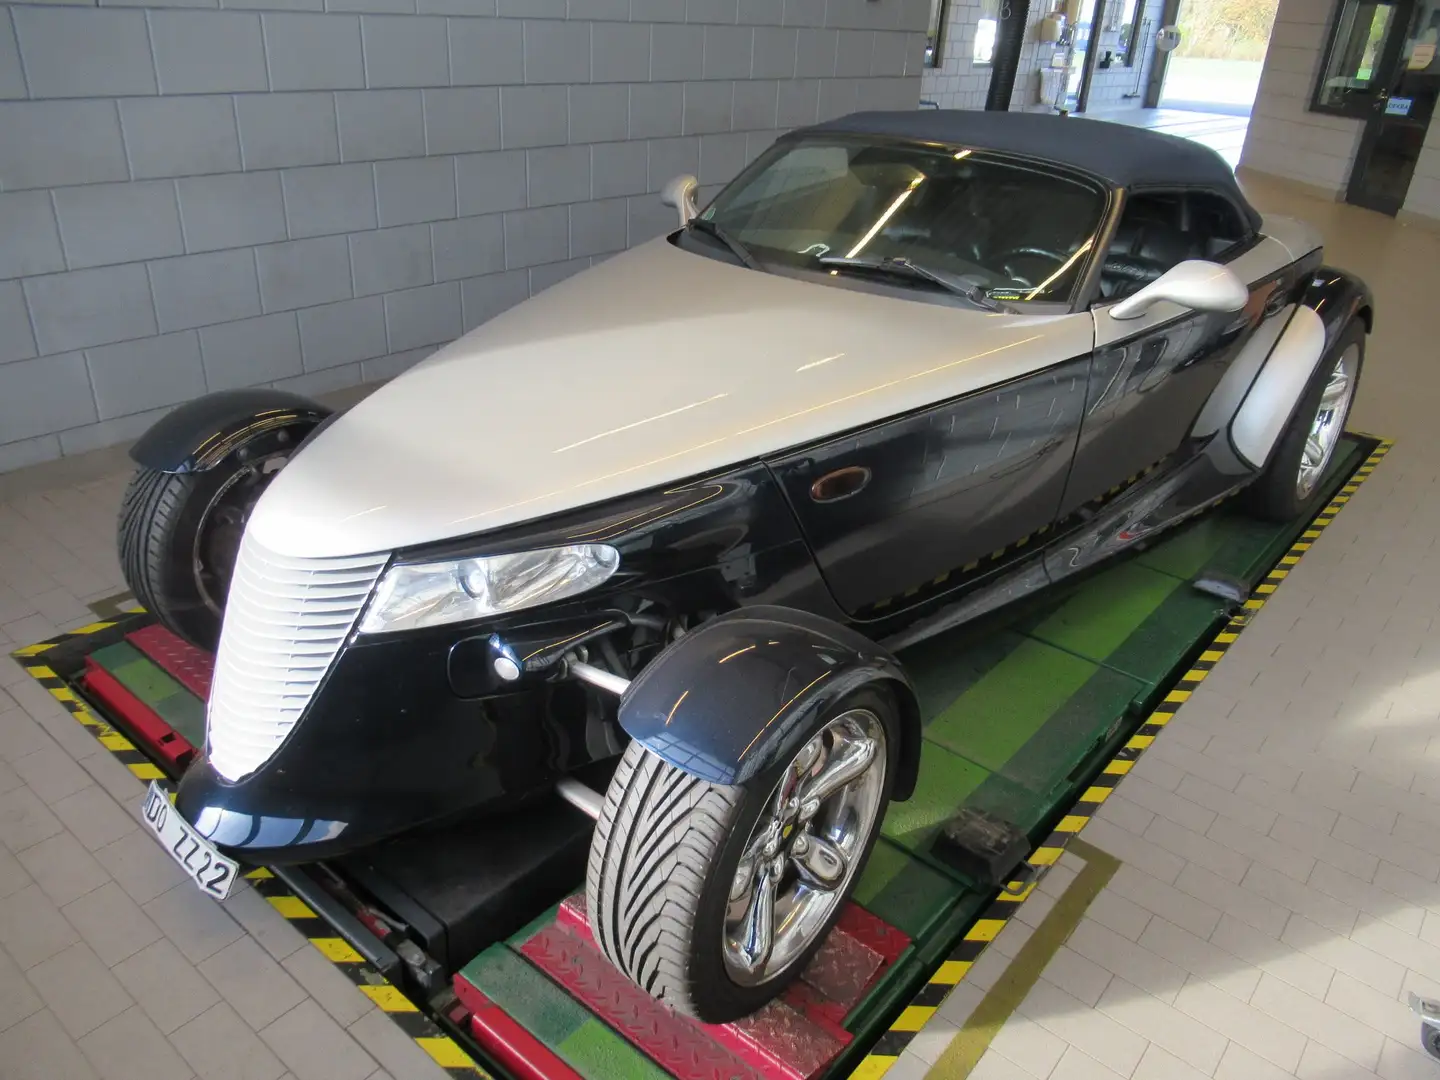 Plymouth Prowler # # # Cool Car for Crazy People # # # Blau - 2